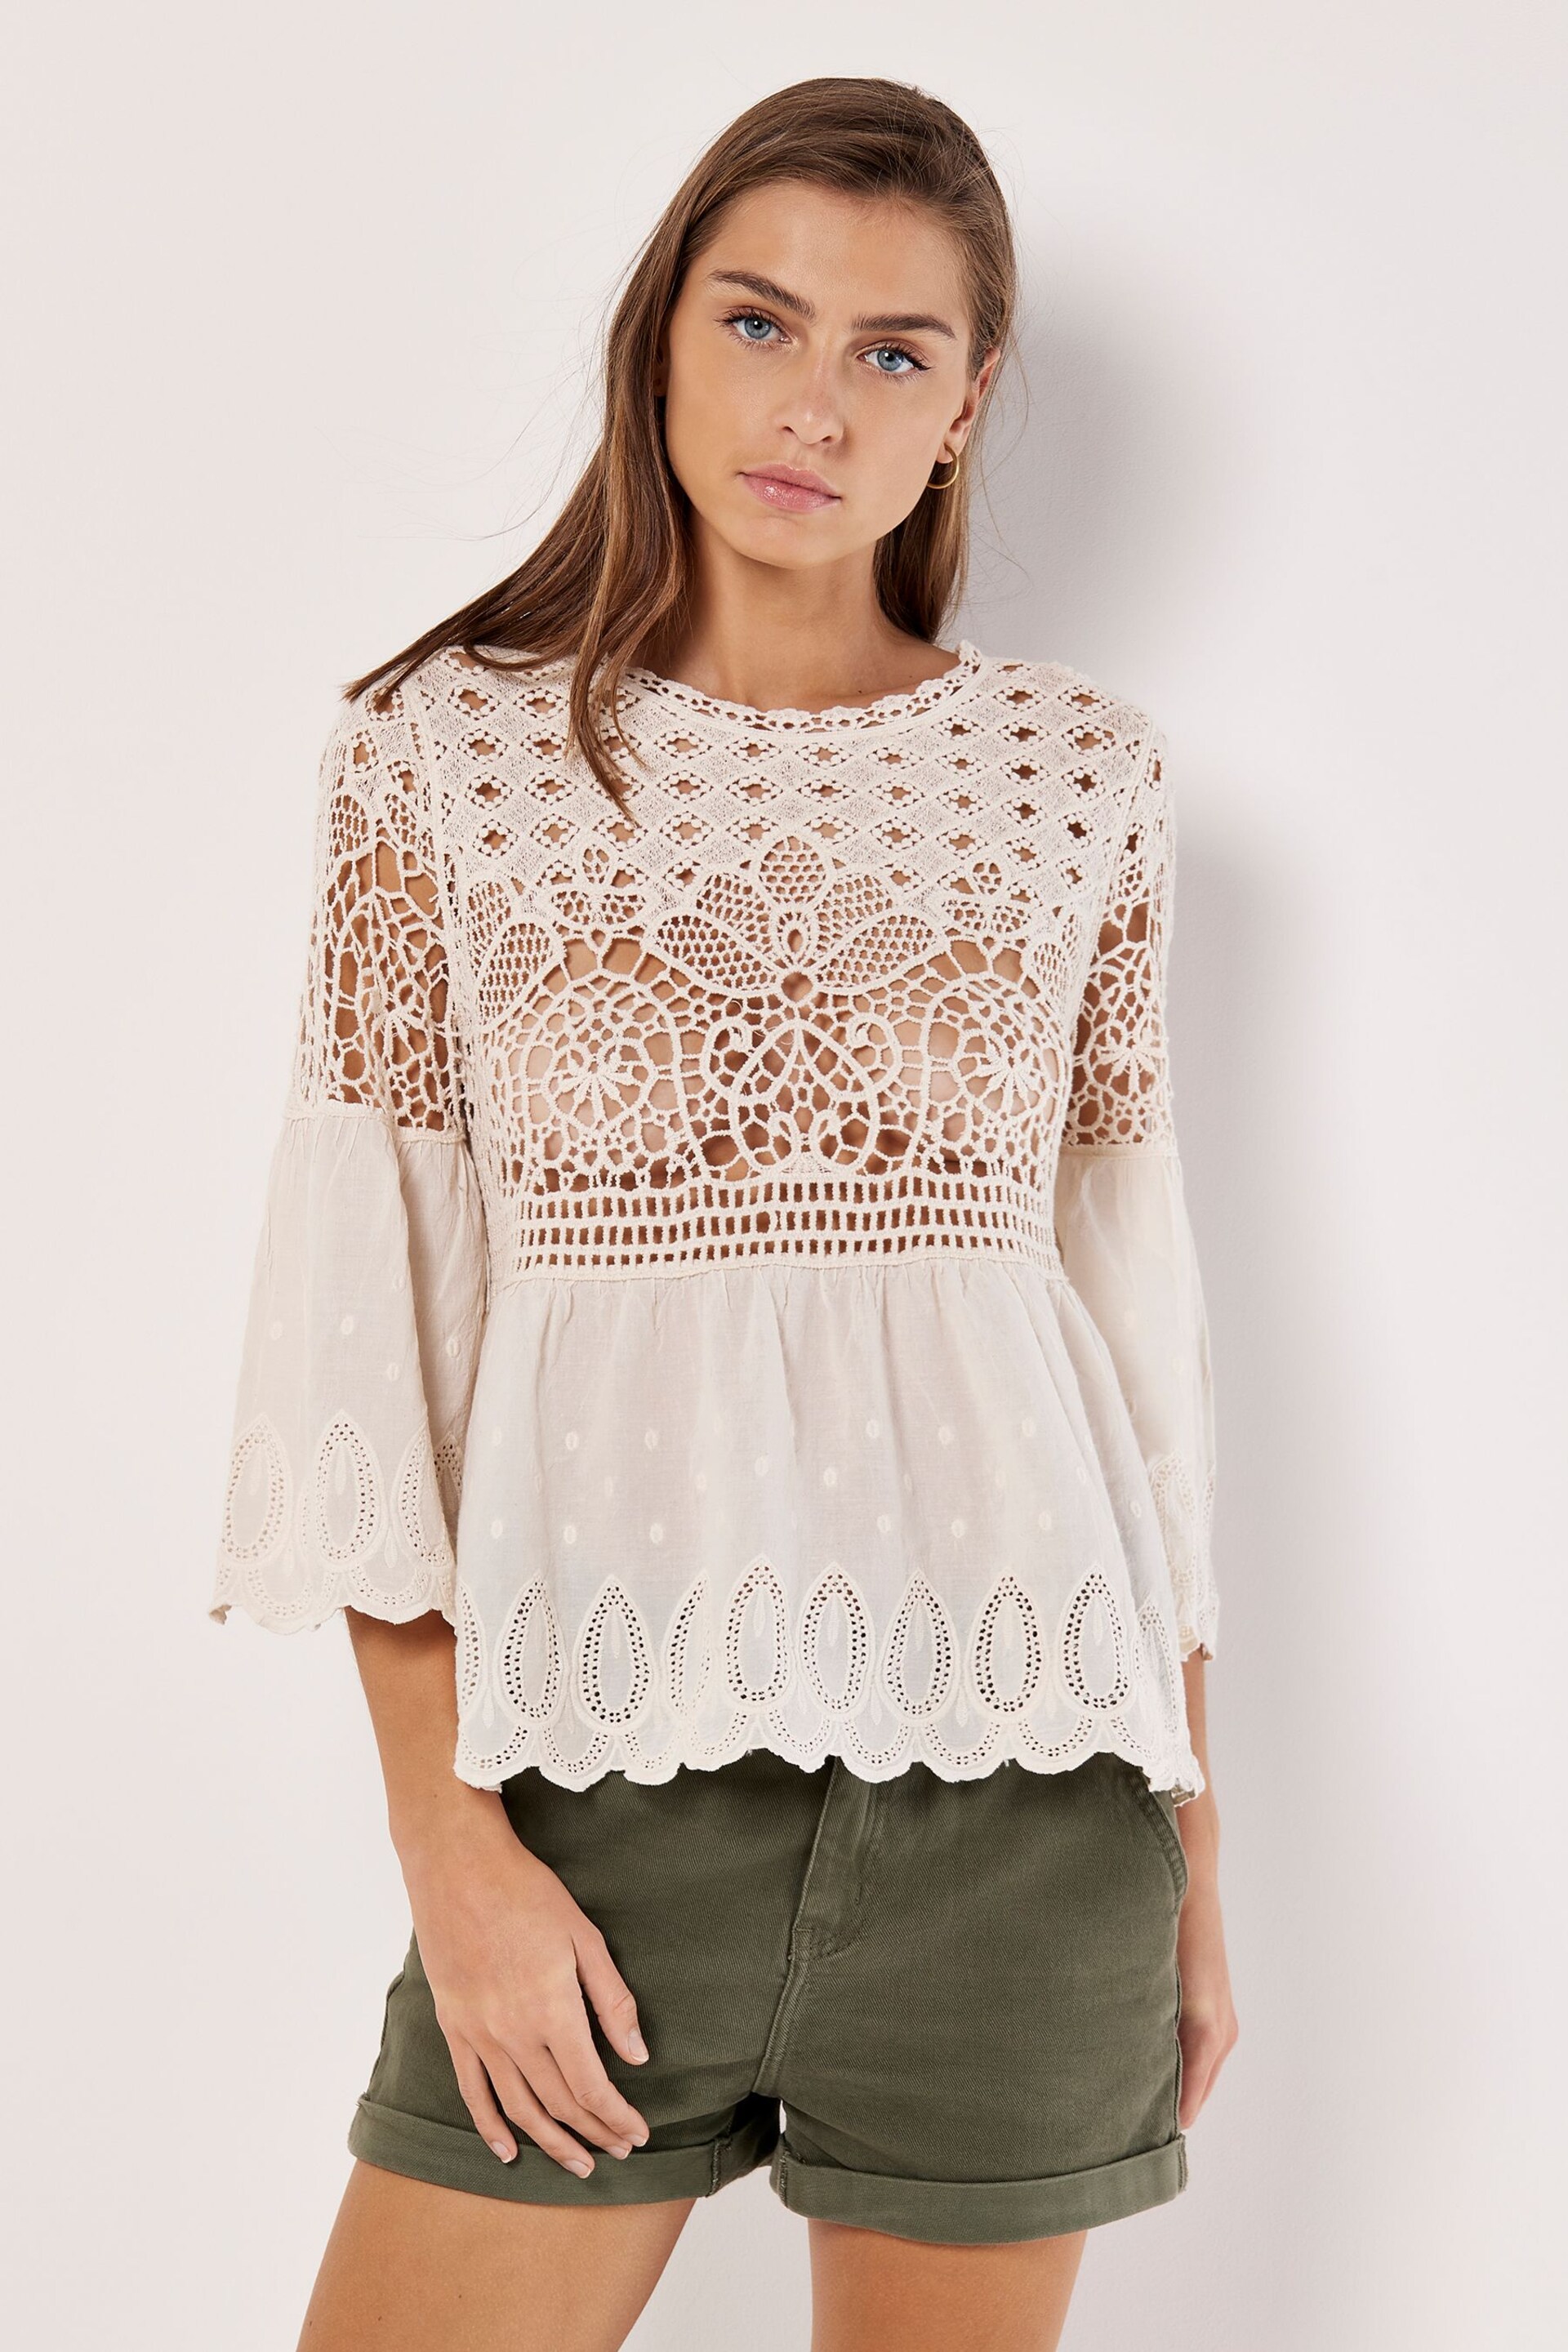 Apricot Natural Crochet Lace & Broderie Folk Top - Image 2 of 4